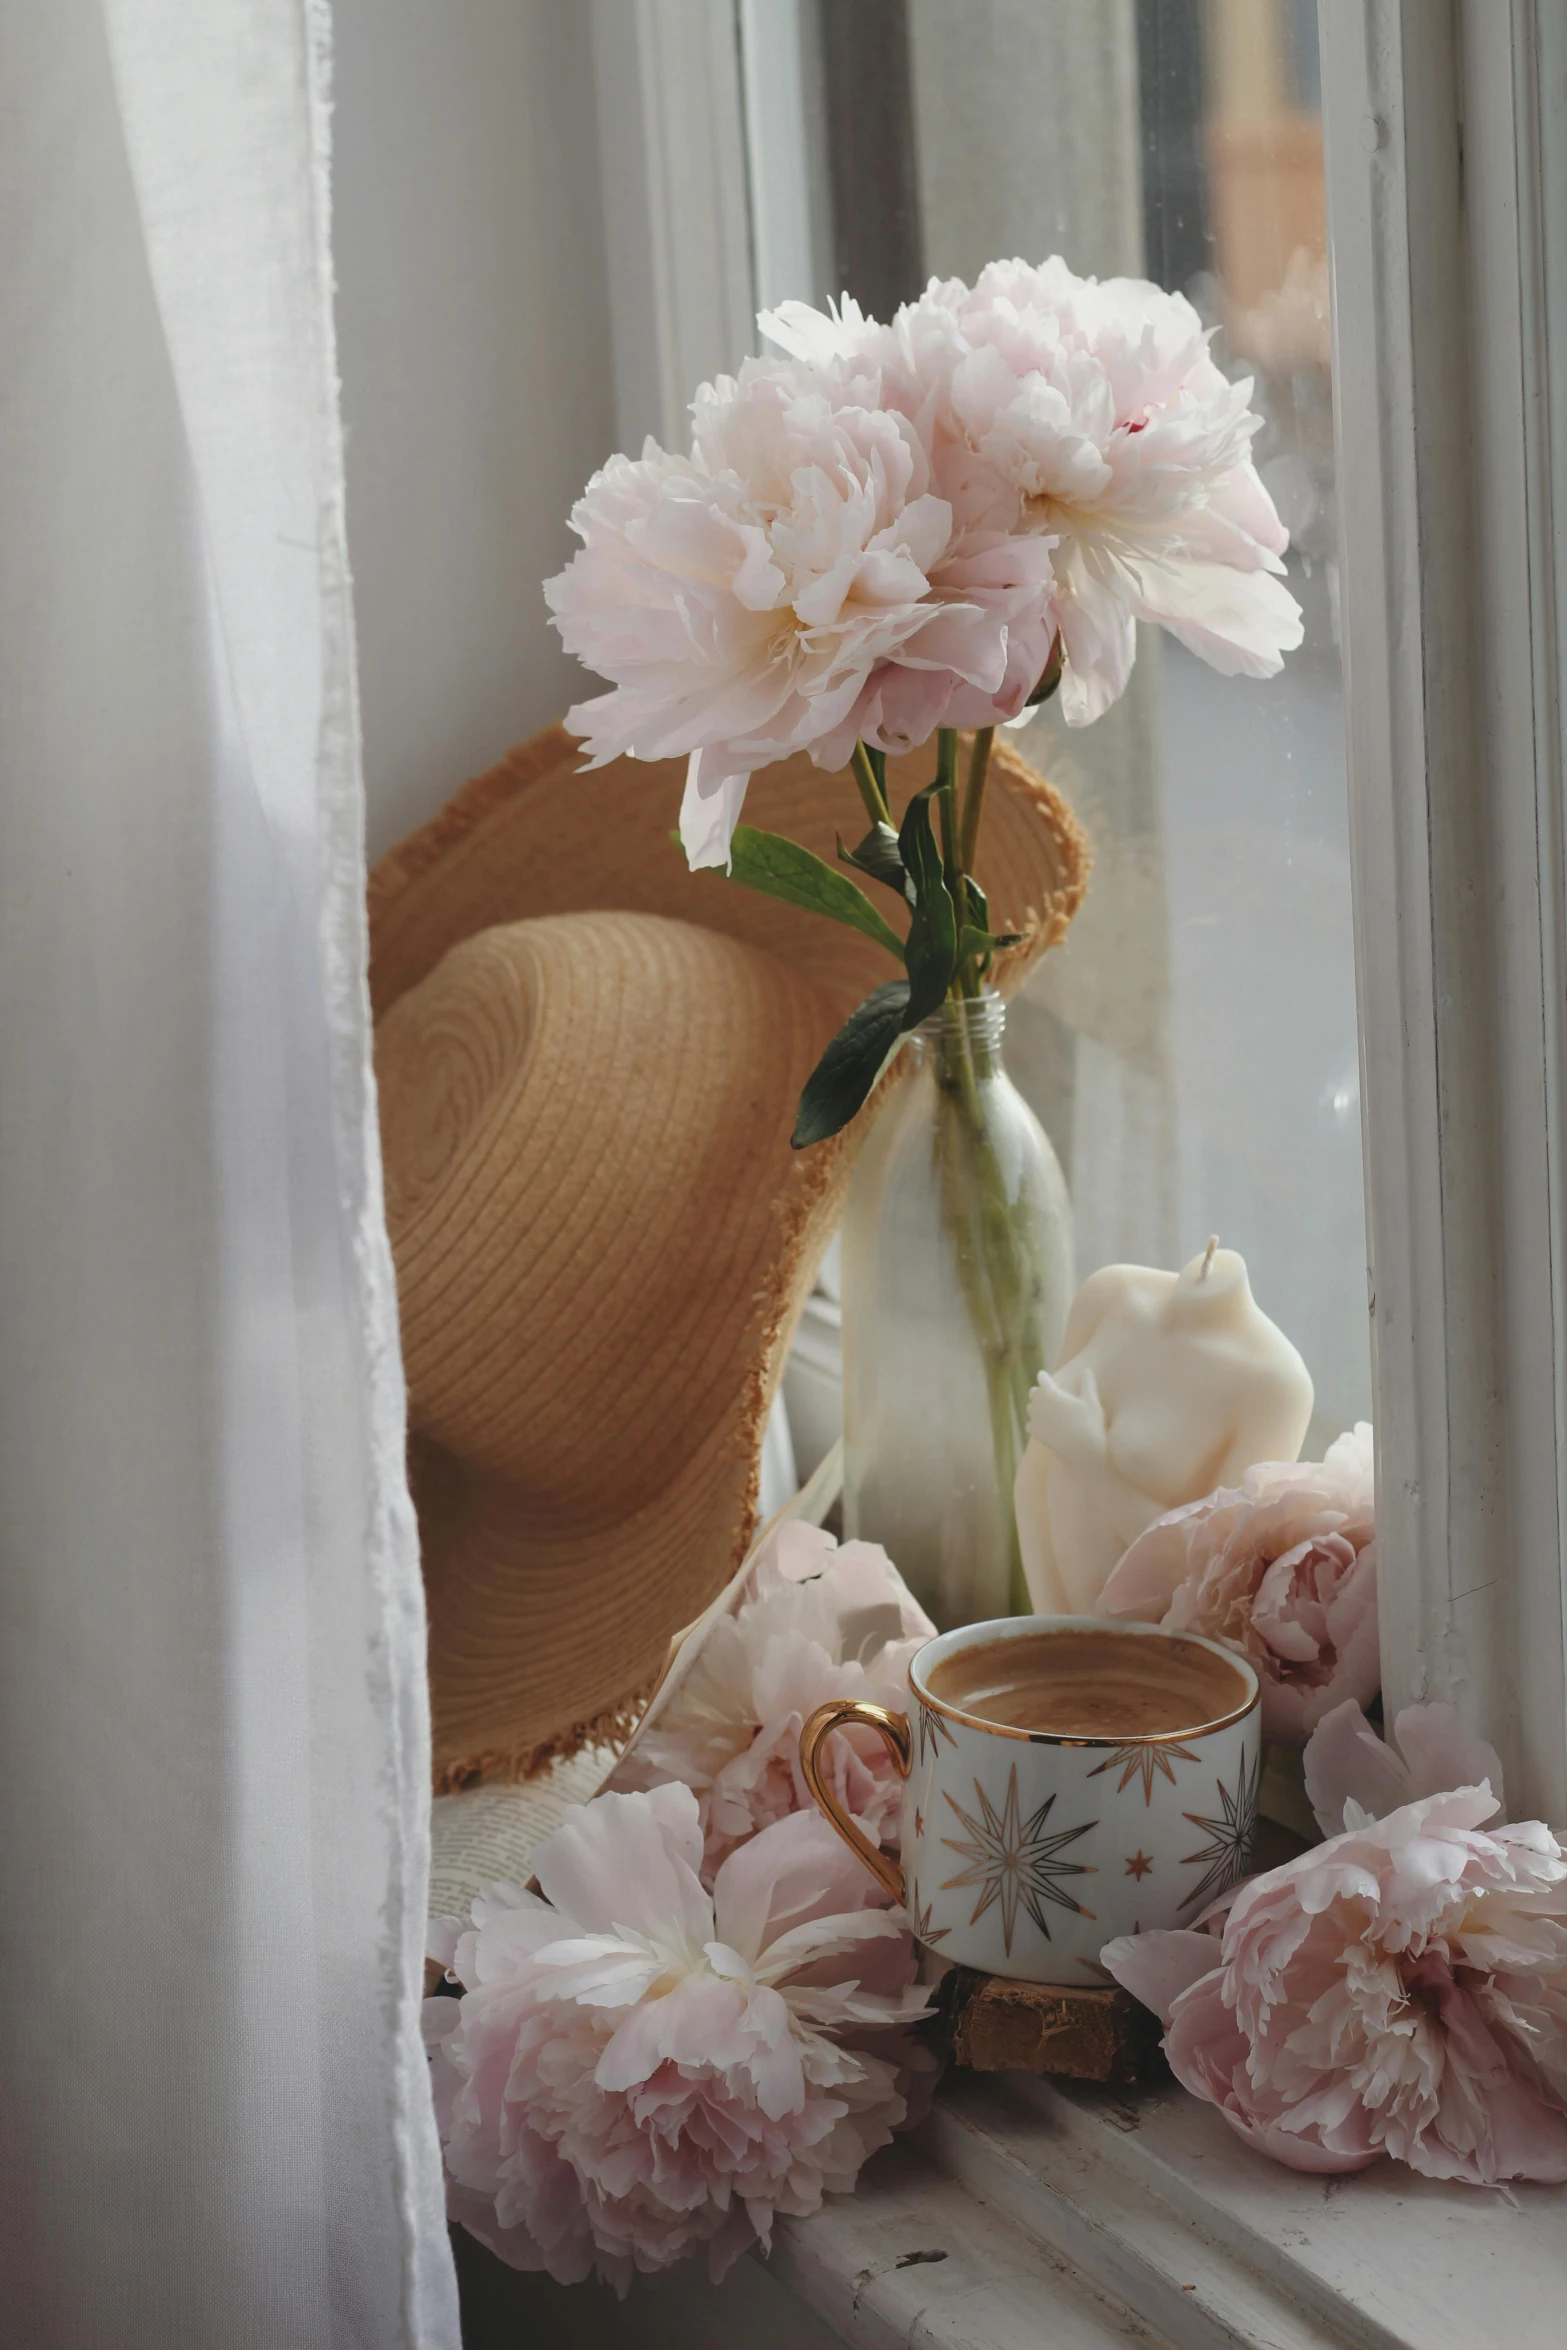 a vase with pink flowers and a tea cup next to it